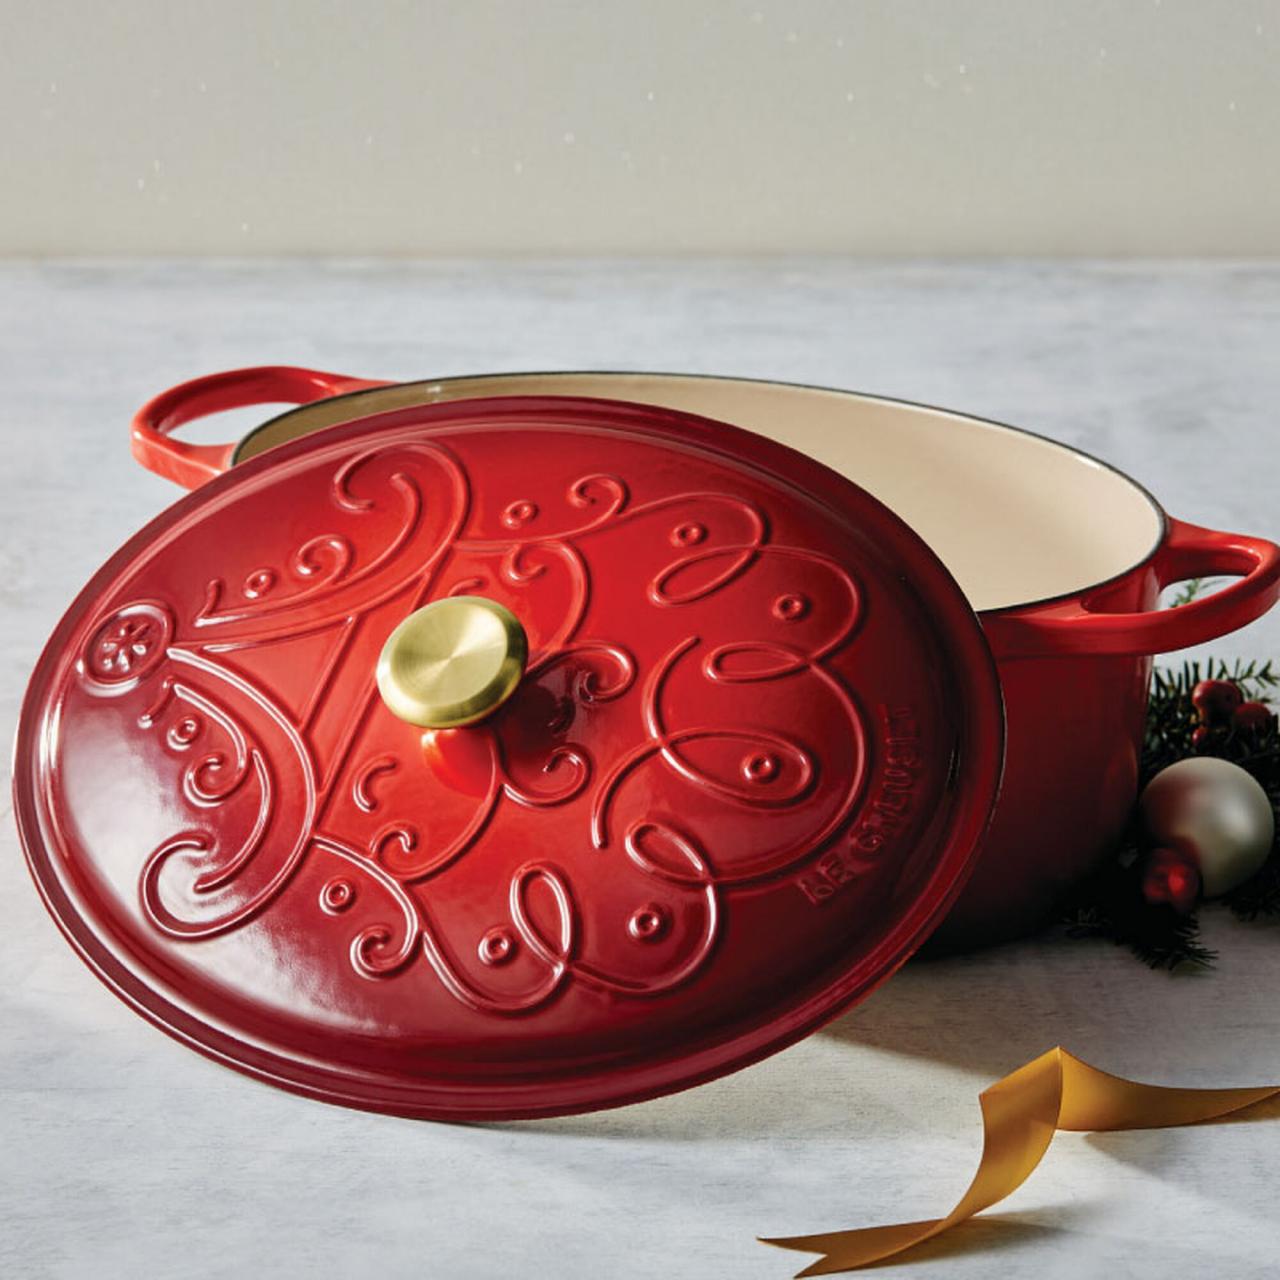 Target's new cookware line is just as swoon-worthy as Caraway